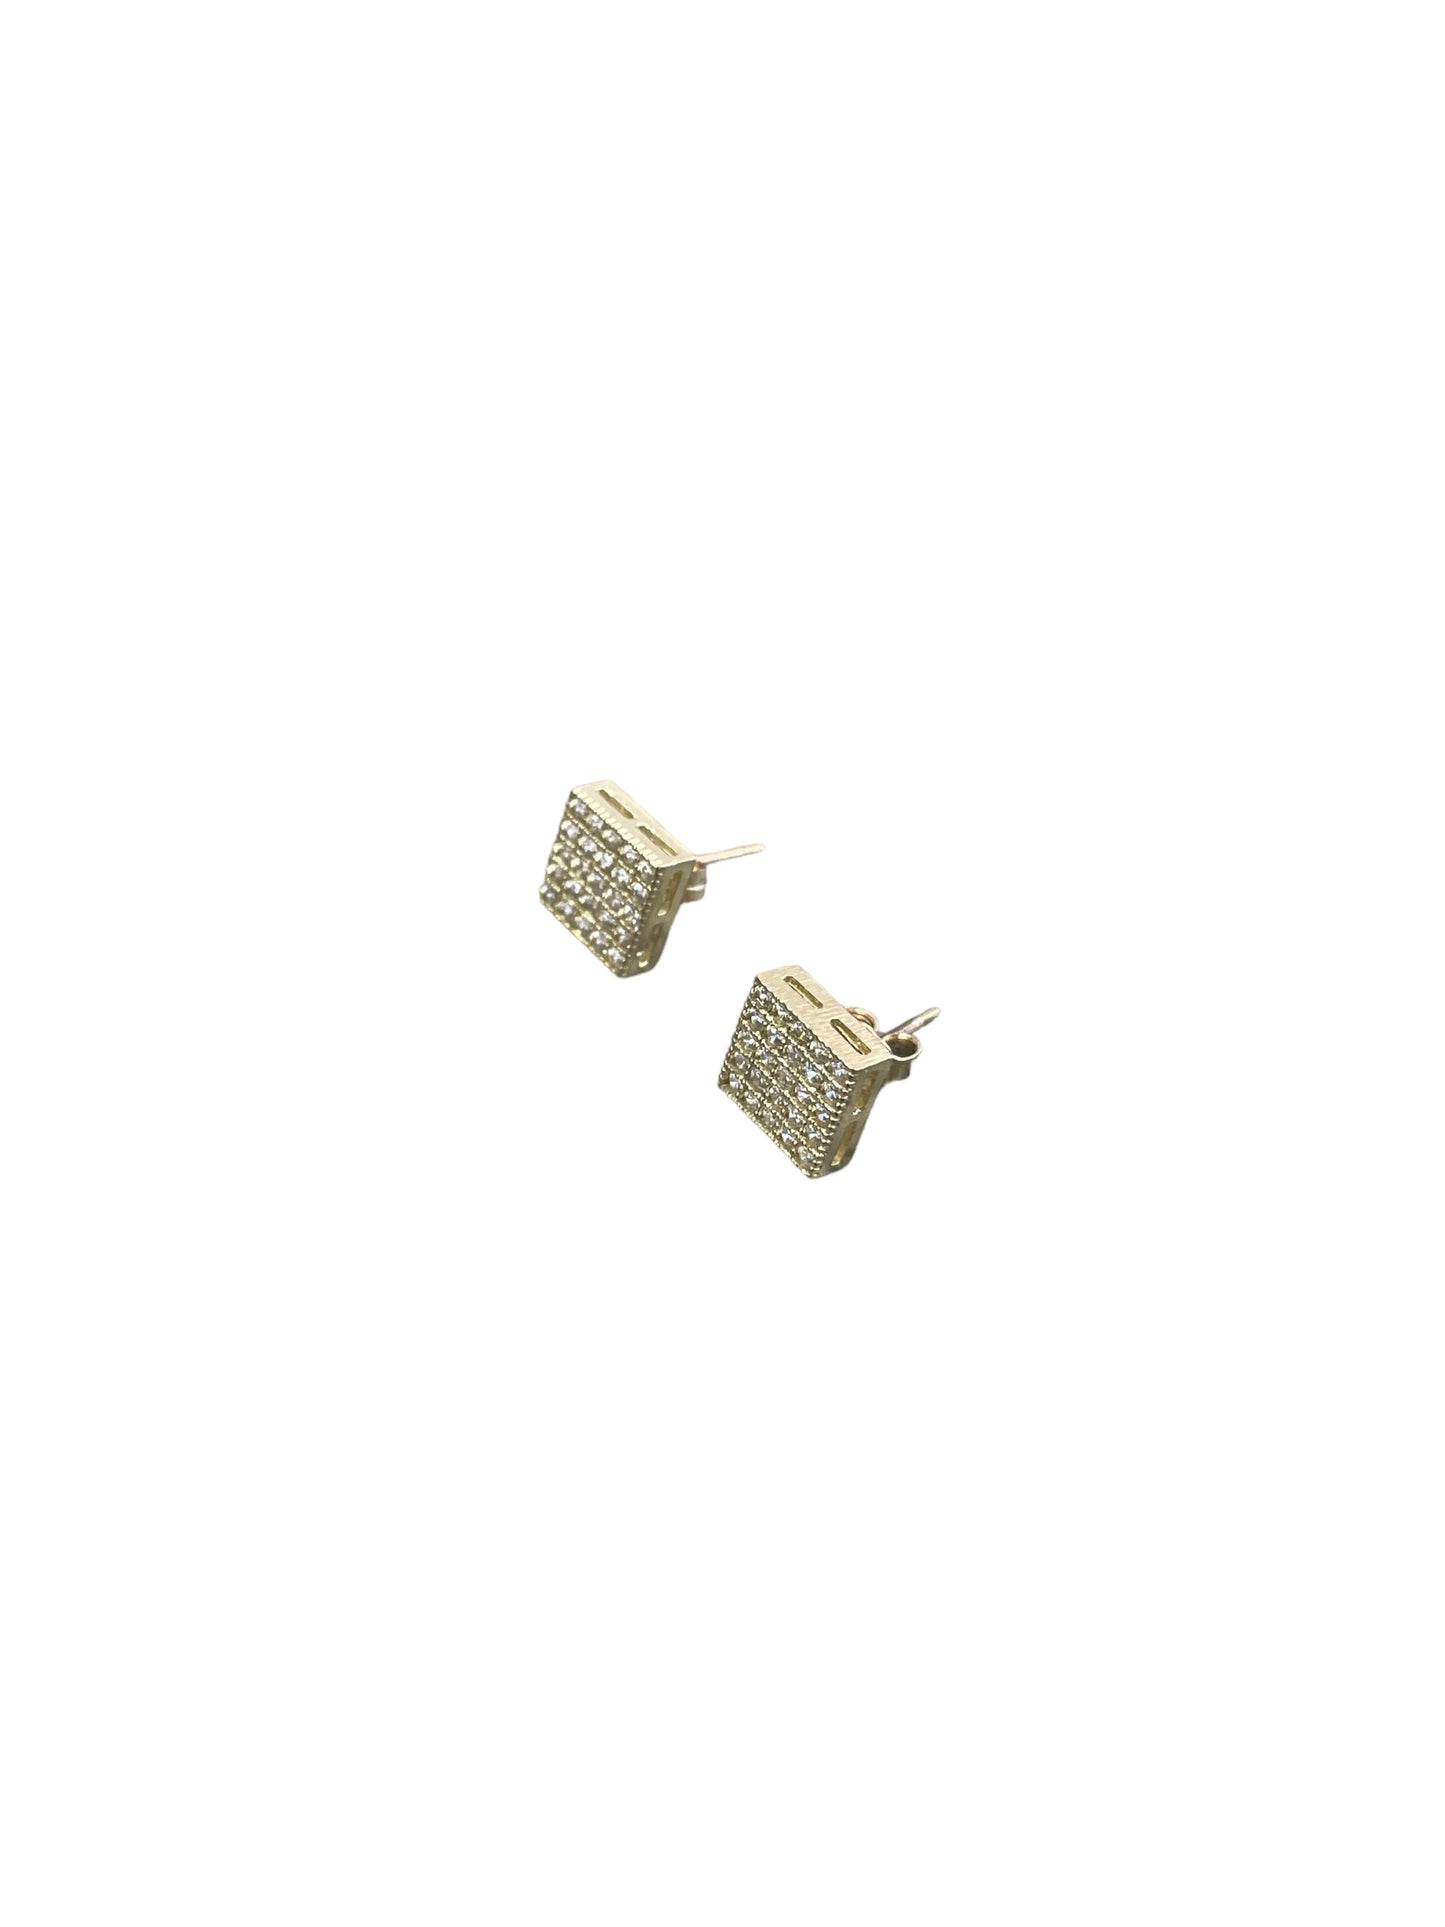 10K Yellow Gold Square Shaped Cluster Earrings (1.7 Grams)